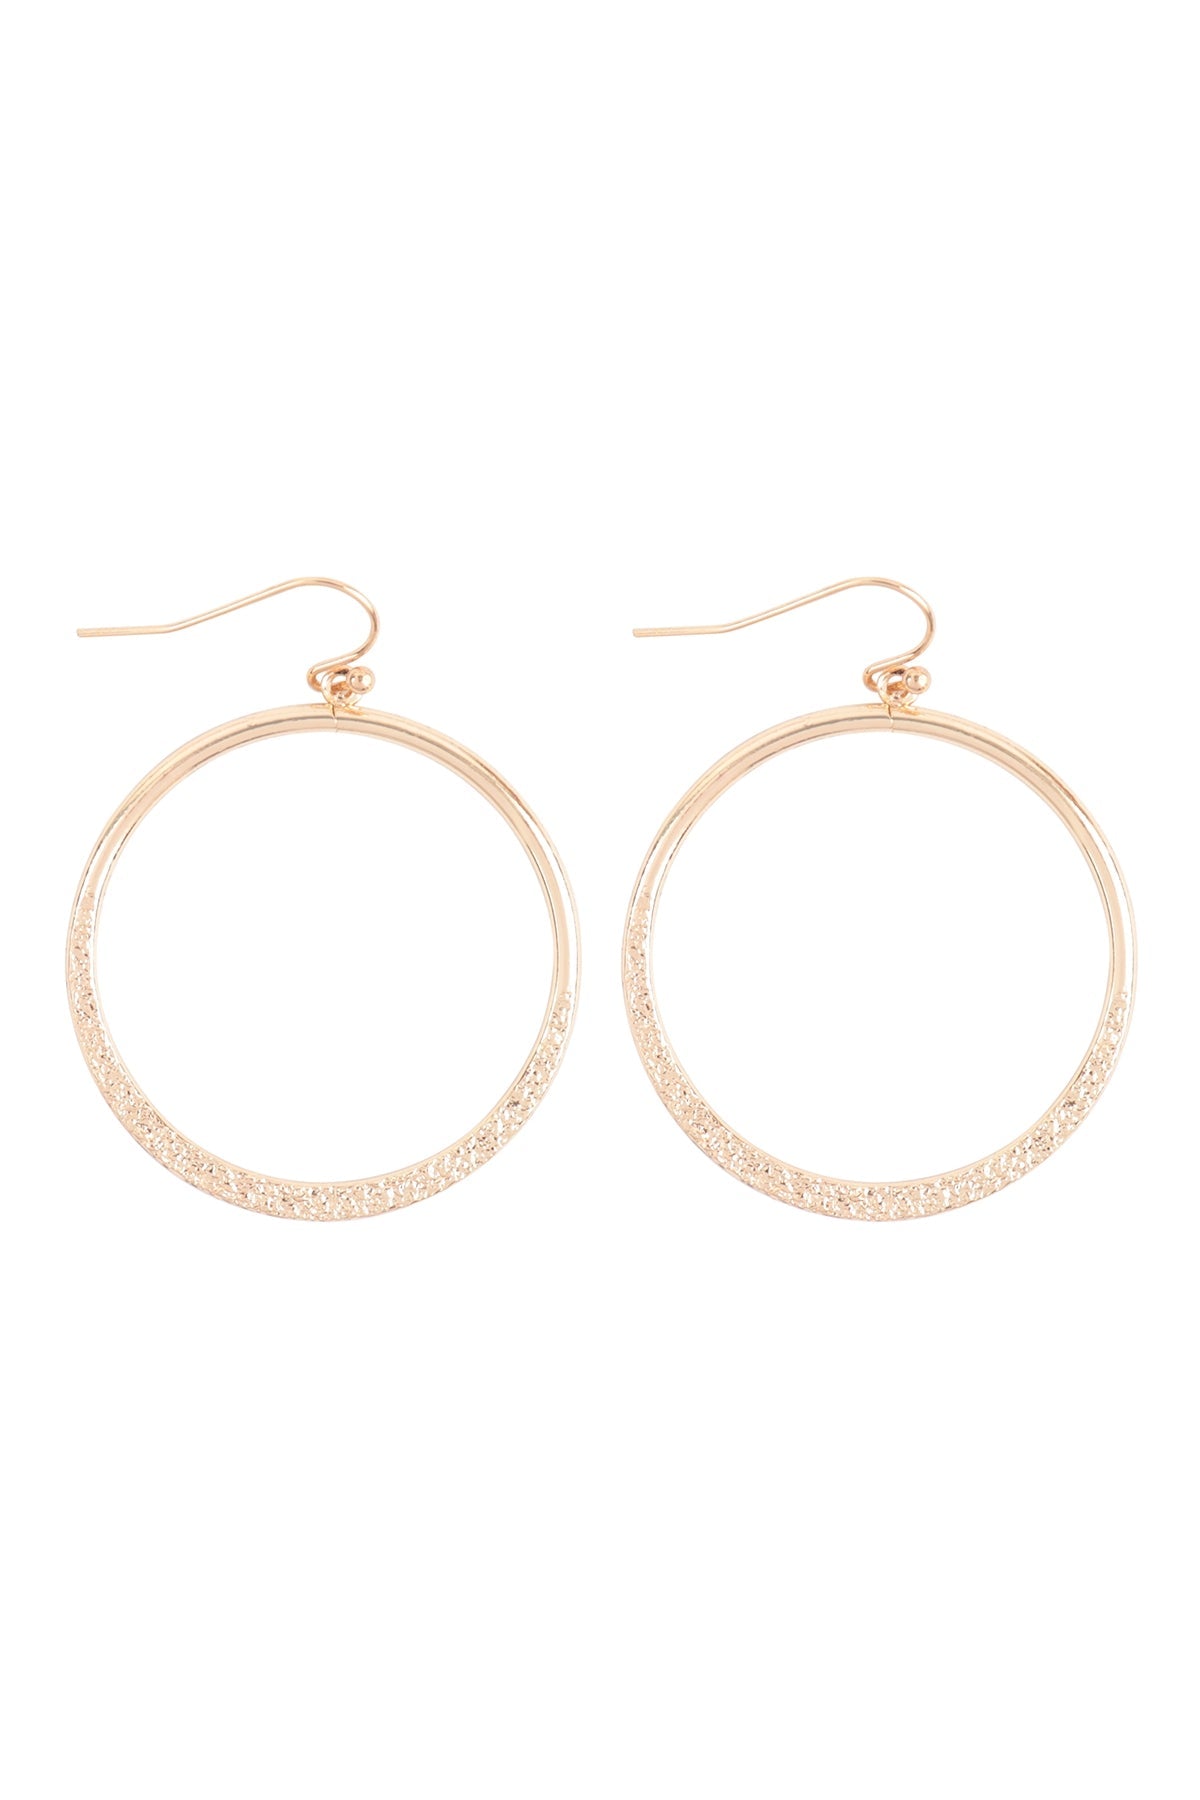 CIRCLE SAND TEXTURED WIRE HOOK EARRINGS